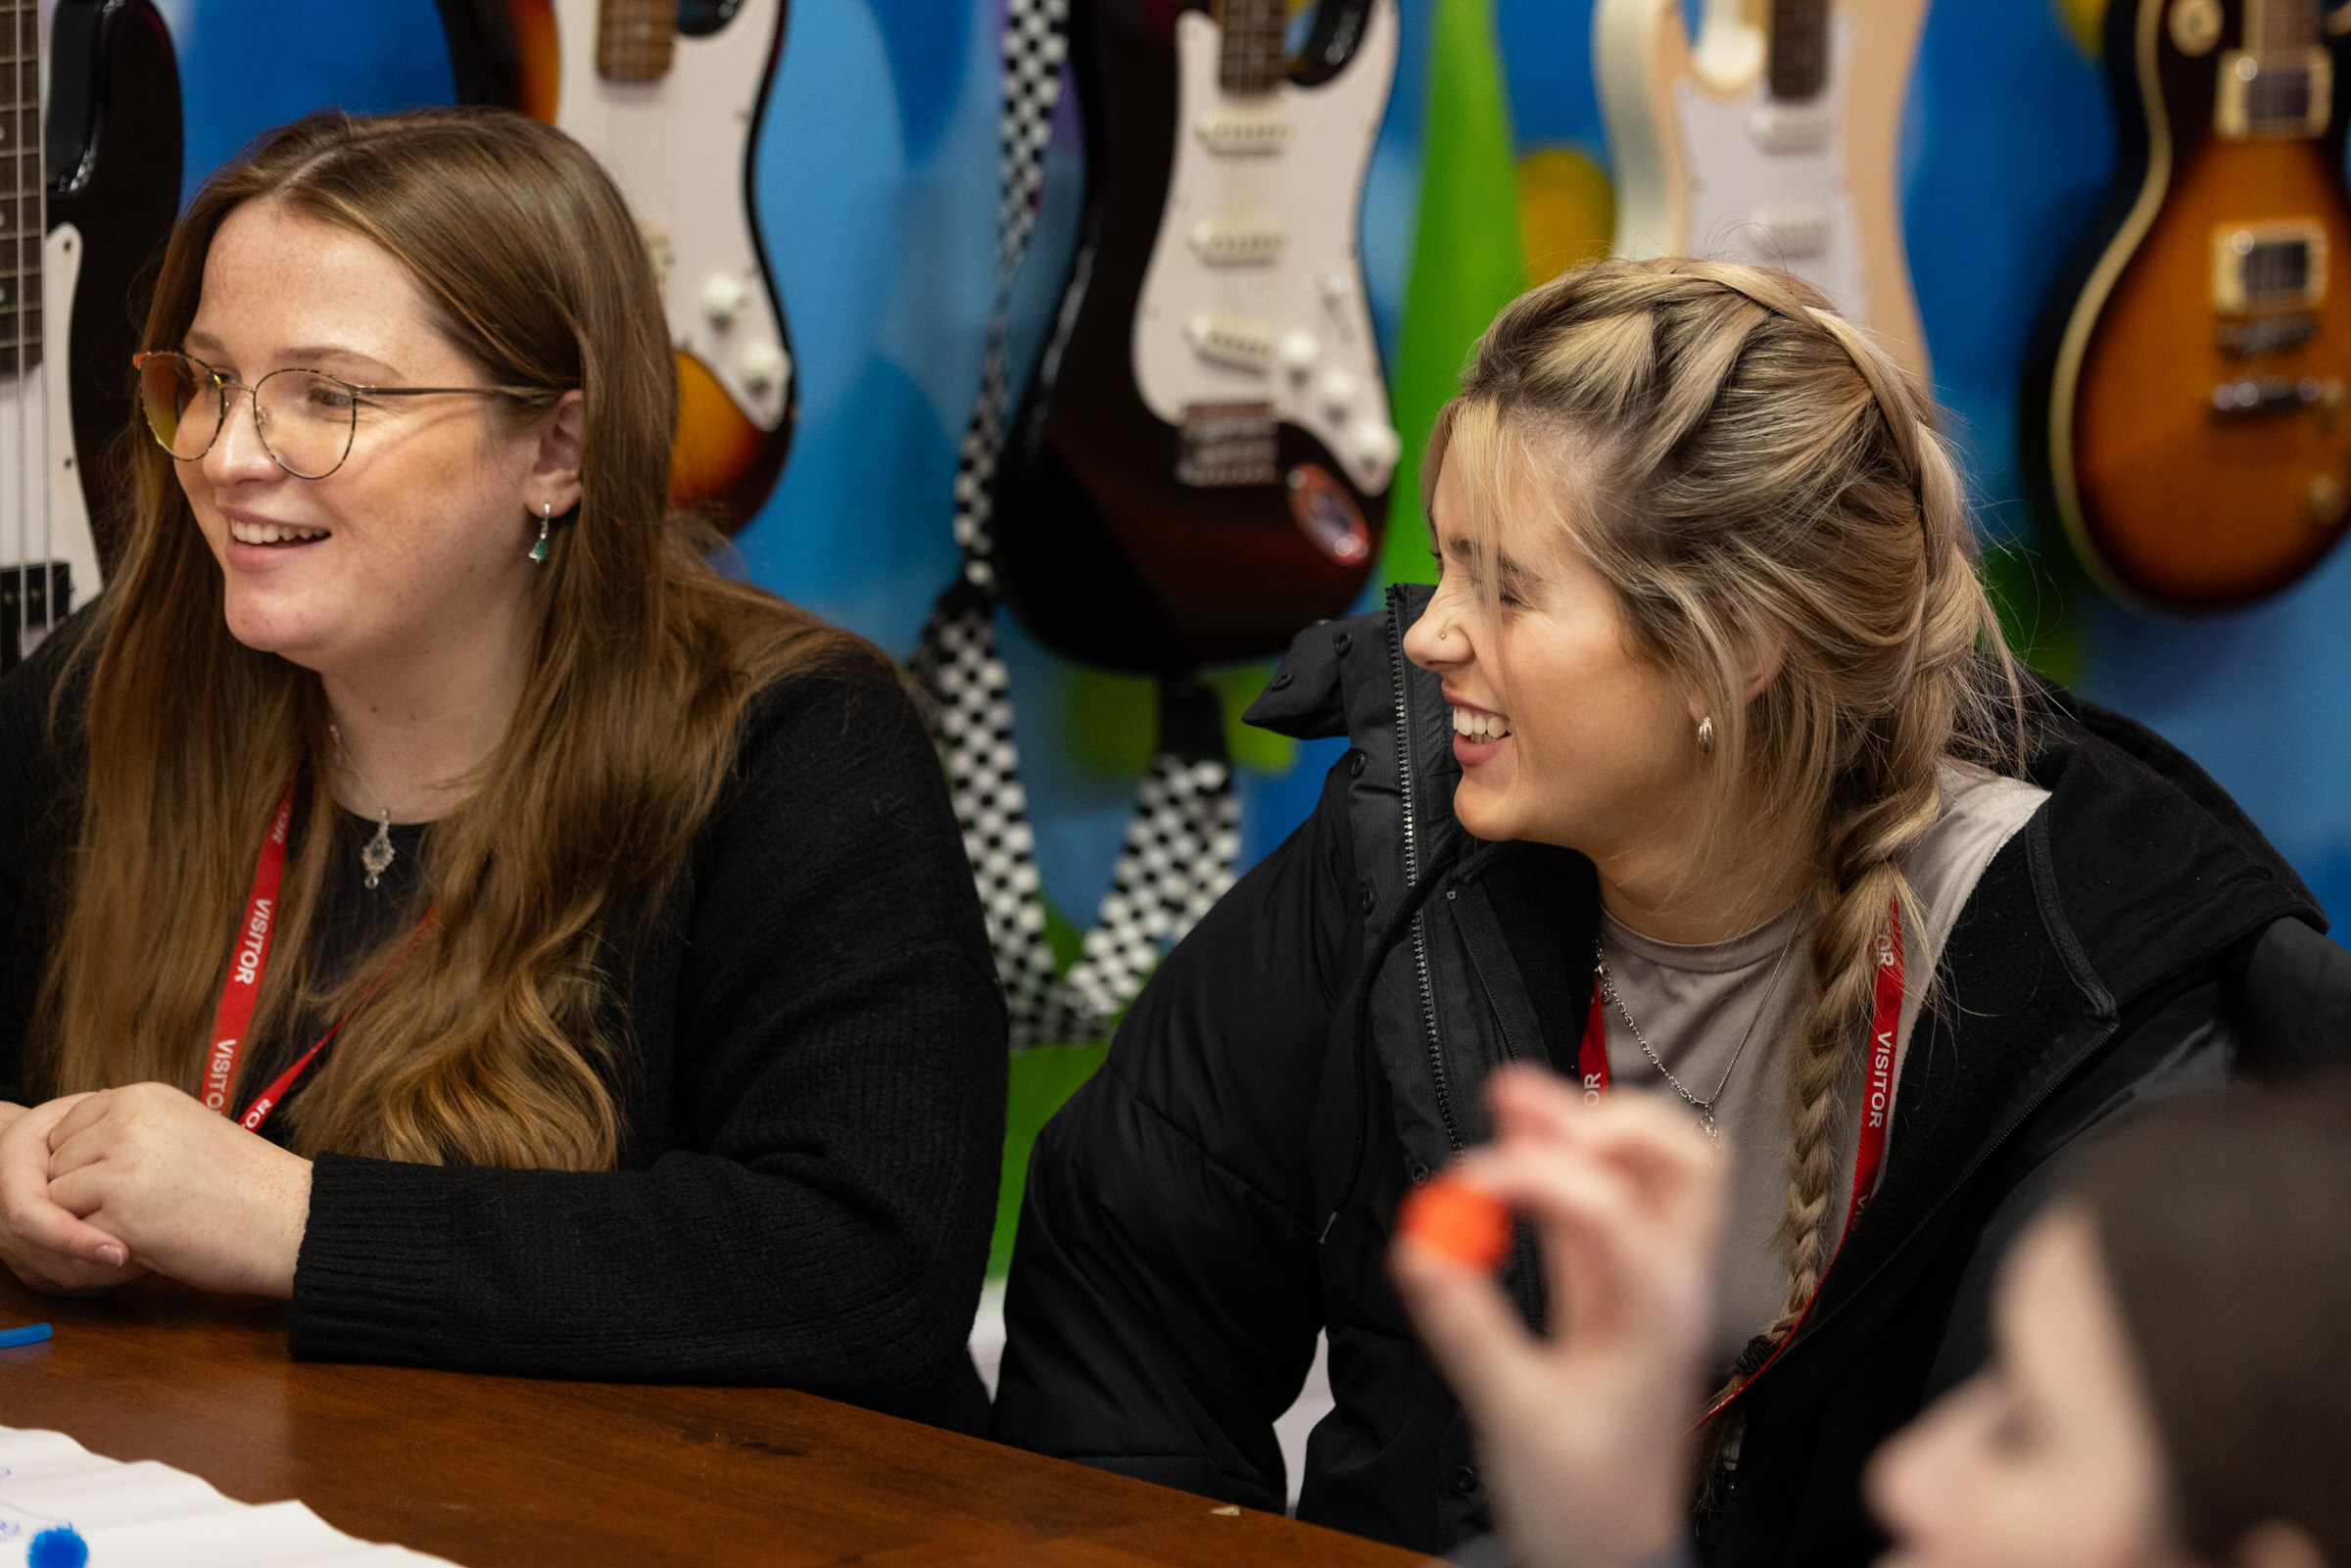 Two young females sit at a desk in front of a wall of colourful electric guitars. They are smiling and laughing.